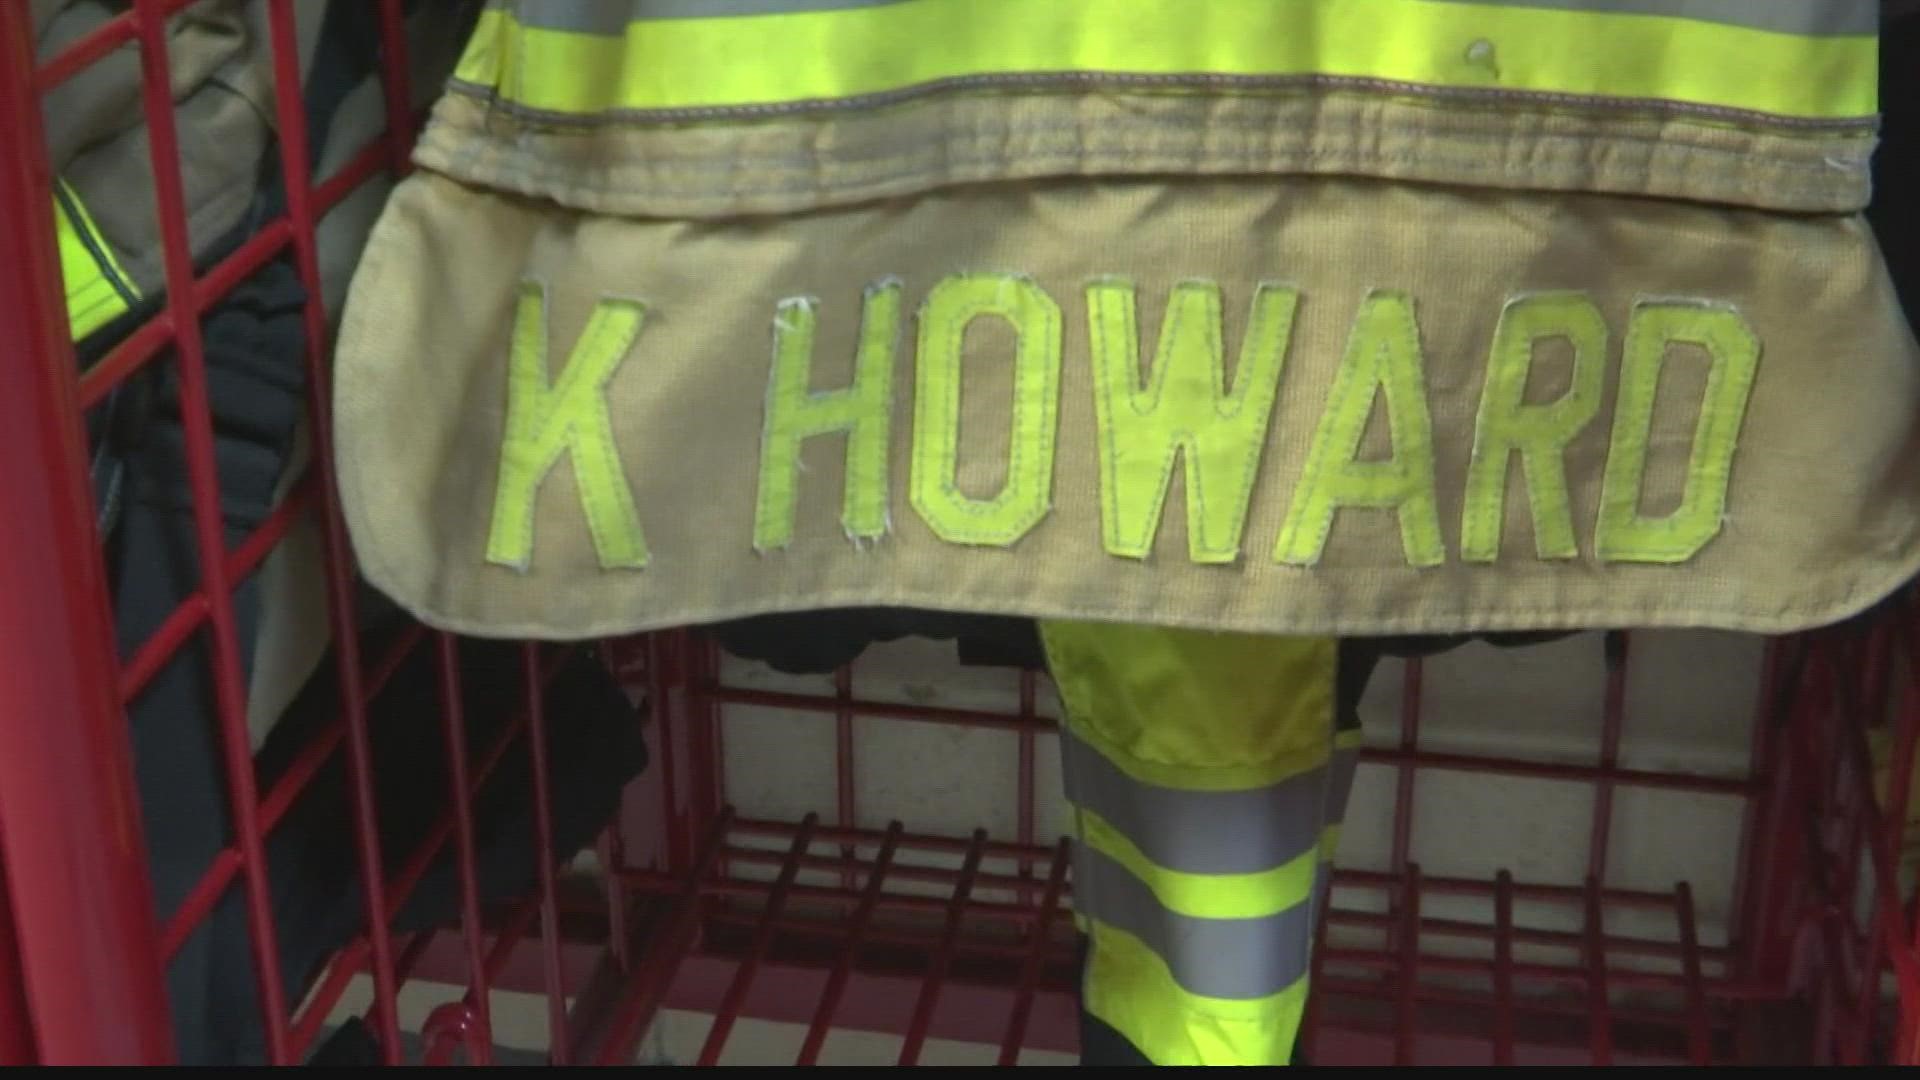 Kenneth Howard has worked with Madison Fire & Rescue for 7 years.